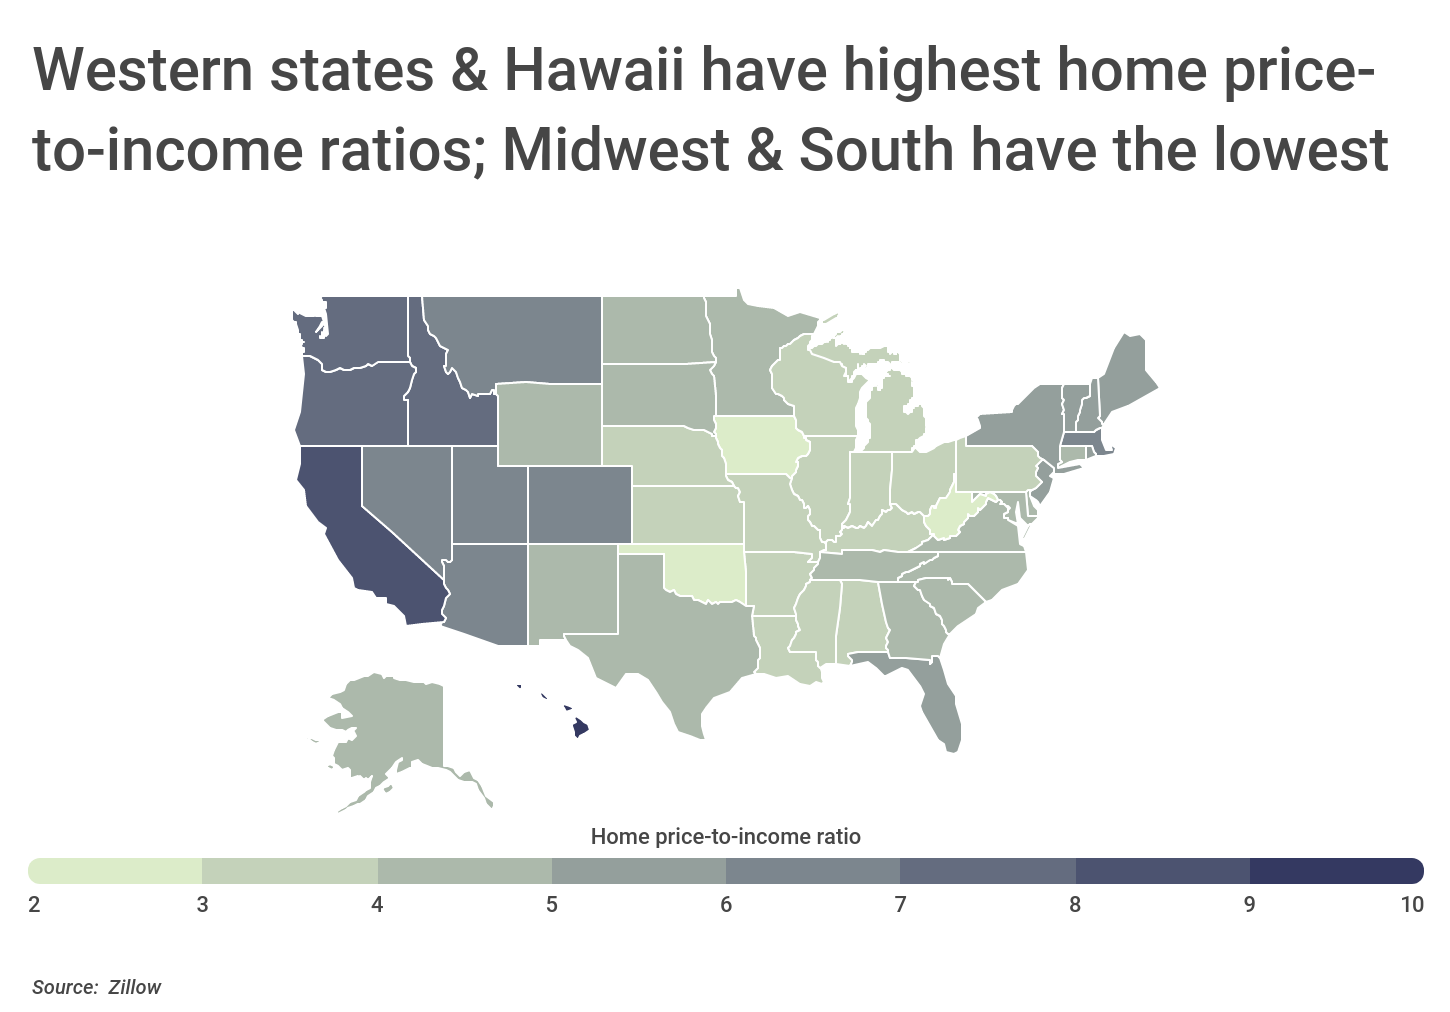 Chart3_Western states & Hawaii have the highest home price-to-income ratios